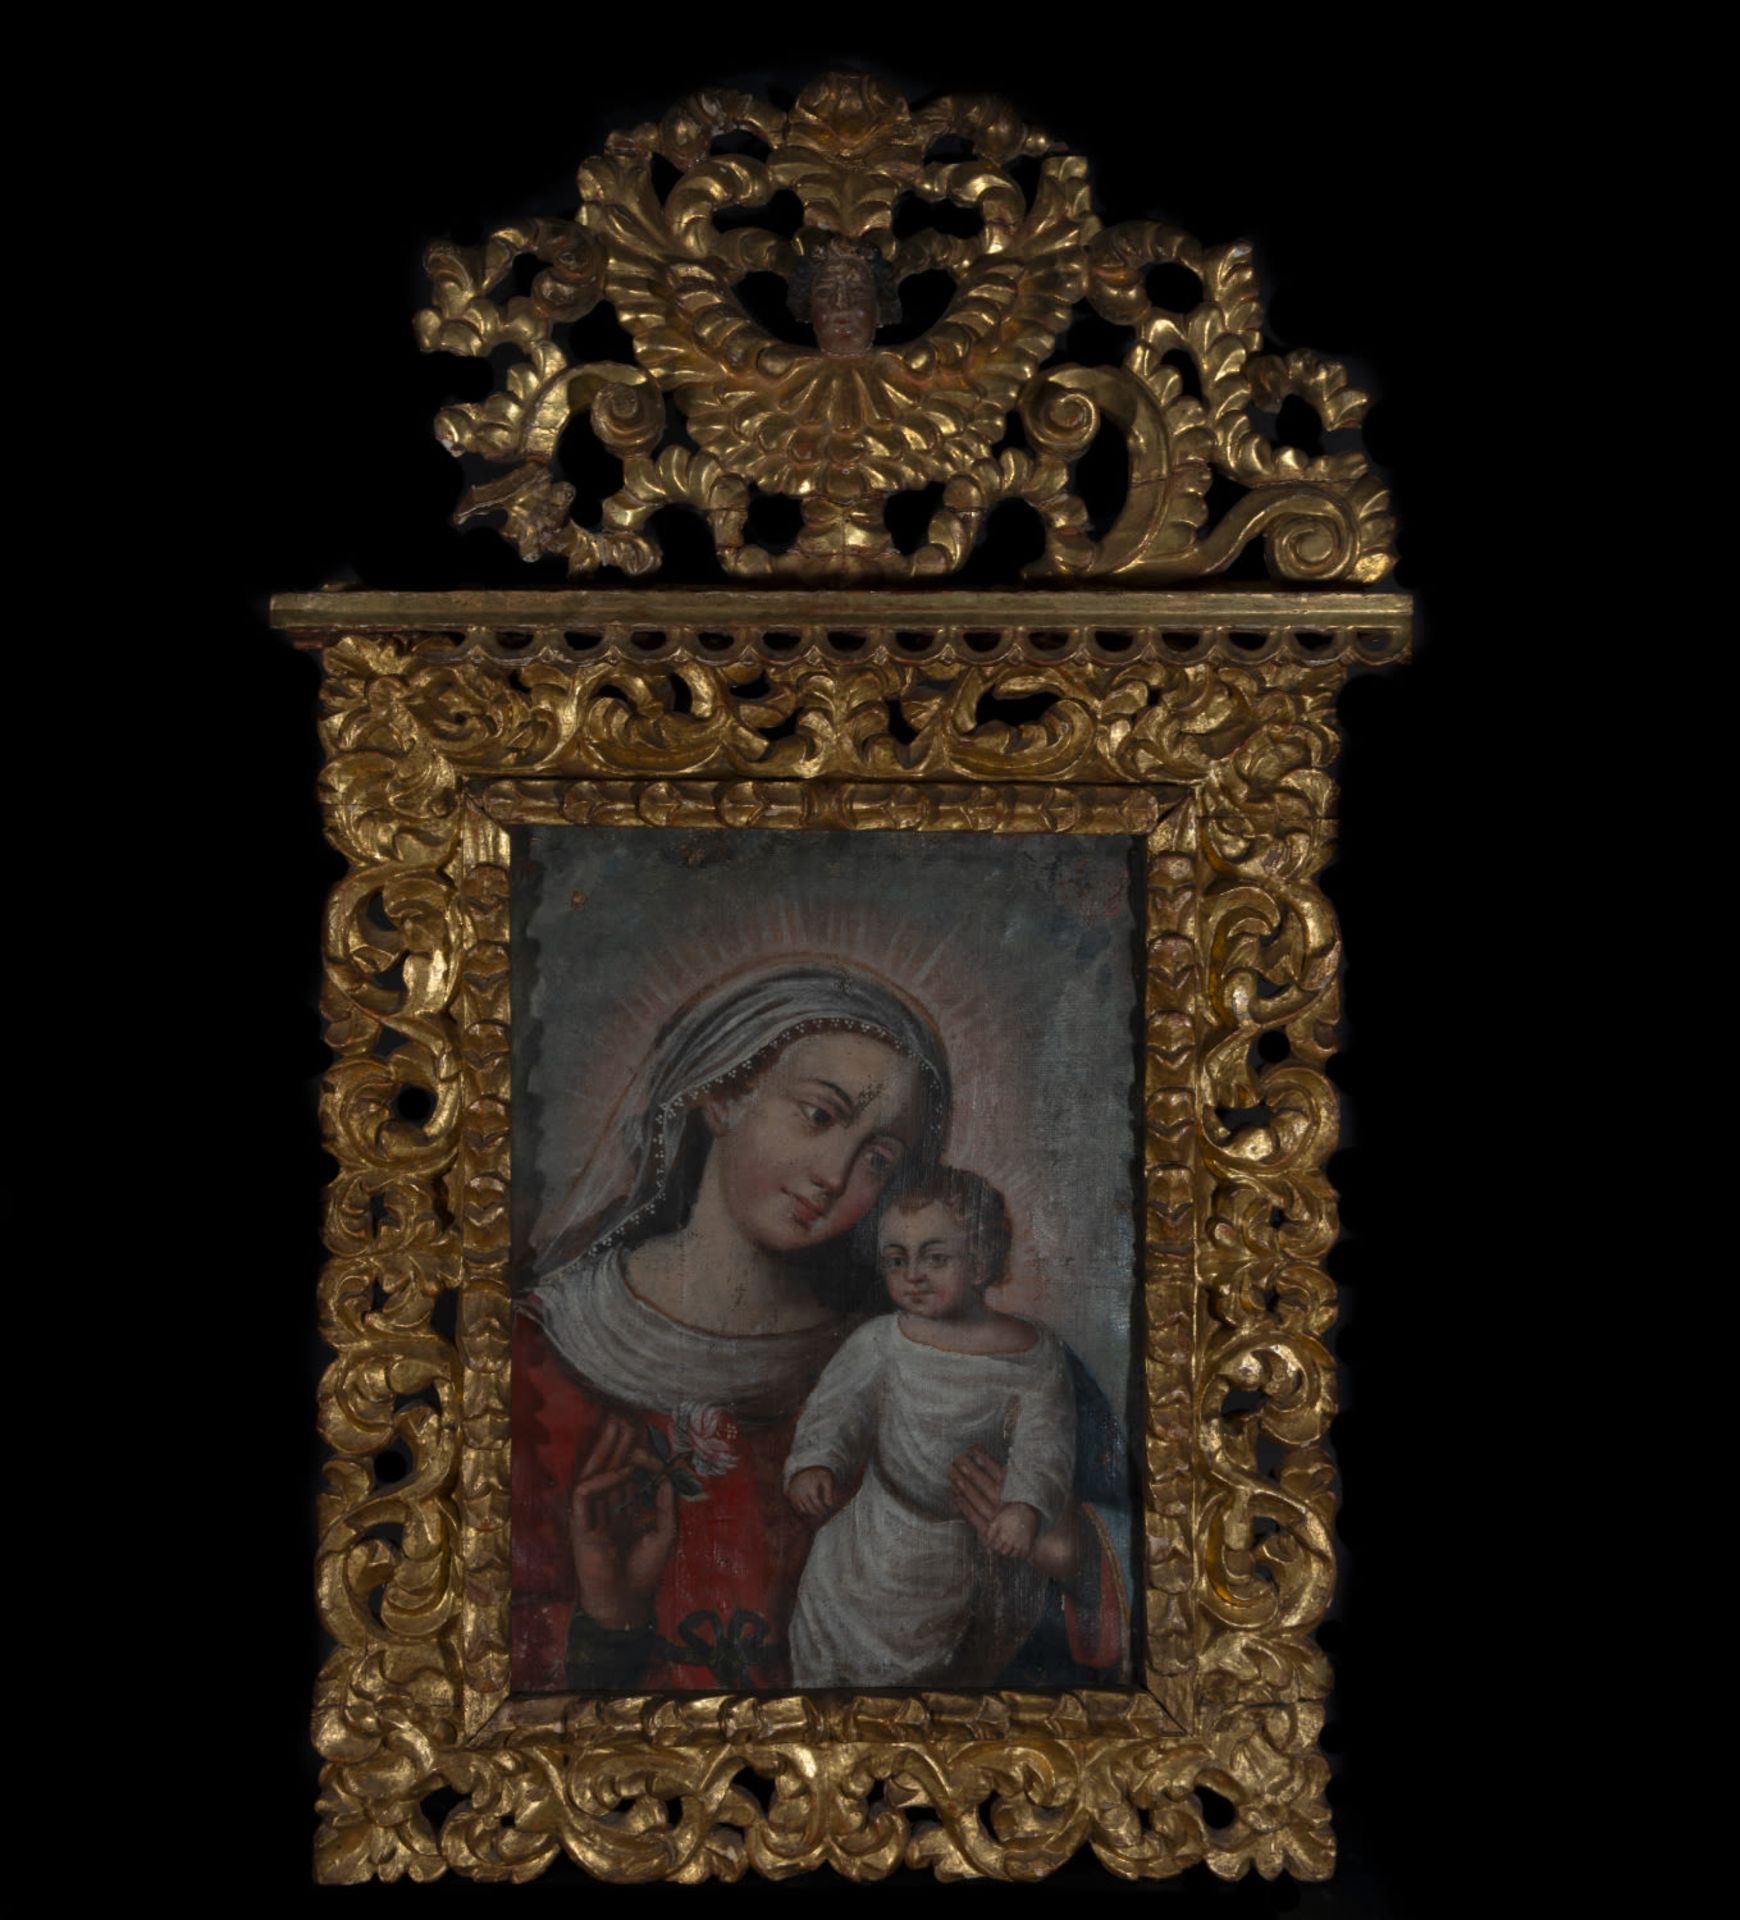 Spanish Viceregal Colonial School, Virgin and Child, with important cornucopia frame of the time in 